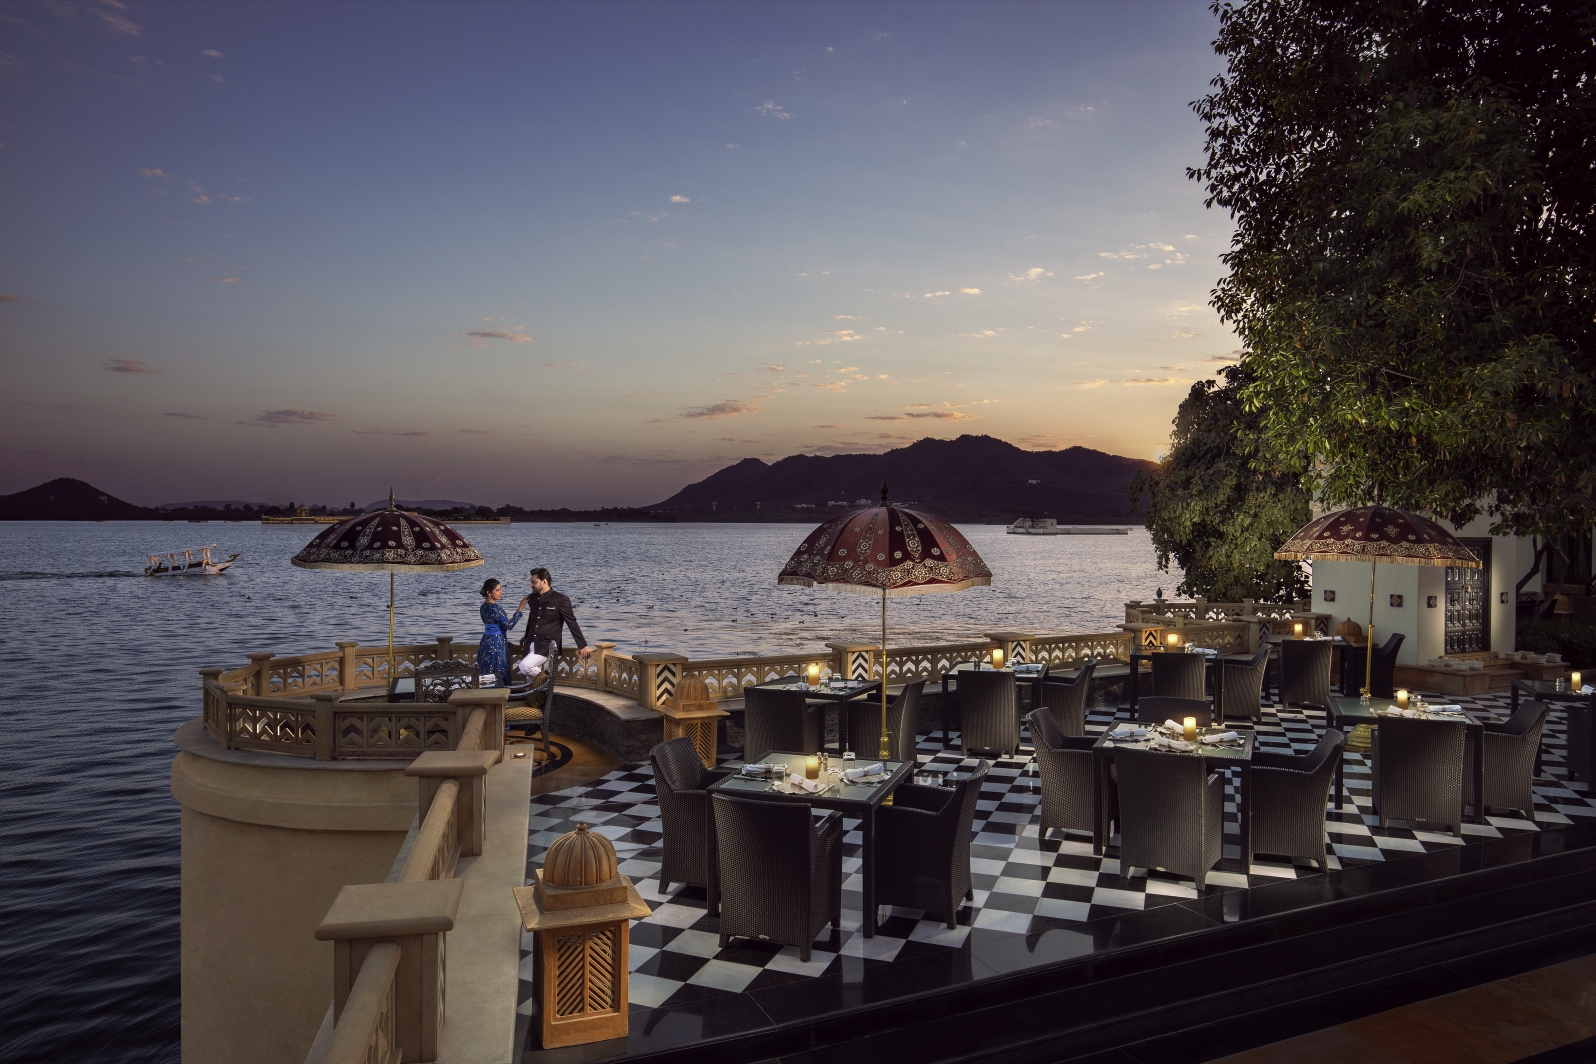 The Leela Palace Udaipur collaborates with World On A Plate to create experiential dining pop-up